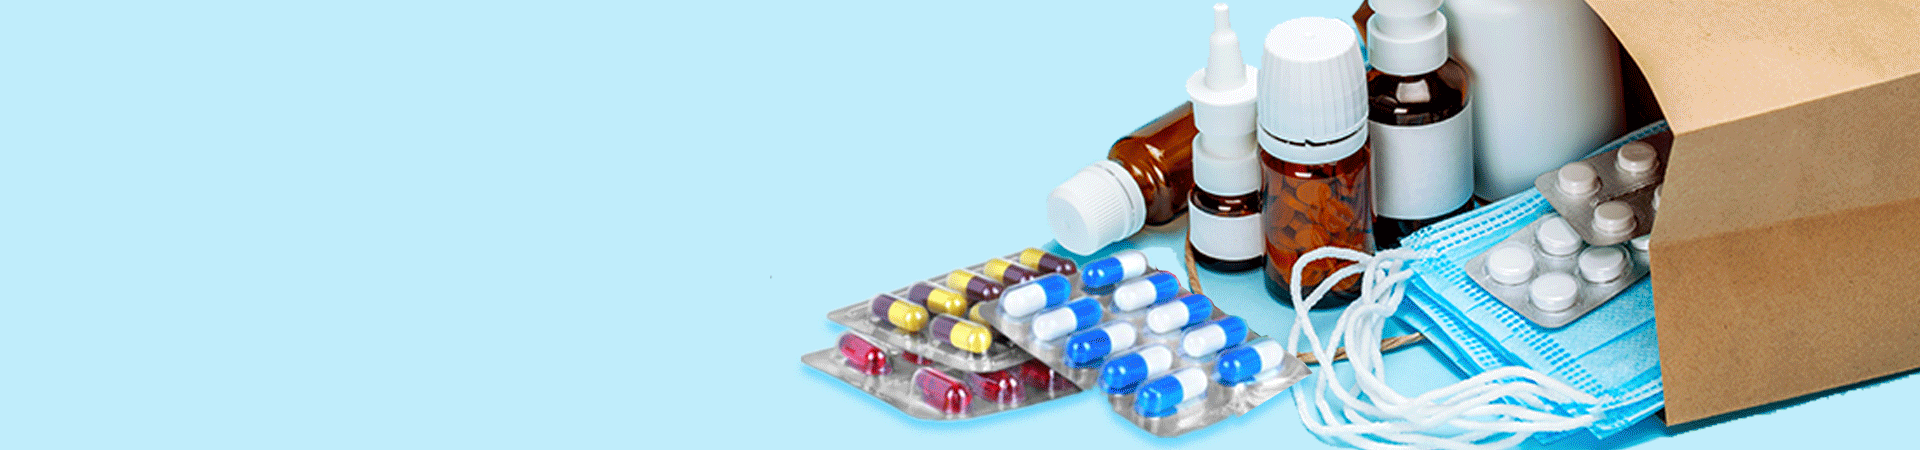 Ciprofloxacin: Uses, Side Effects, Dosage, Precautions & More